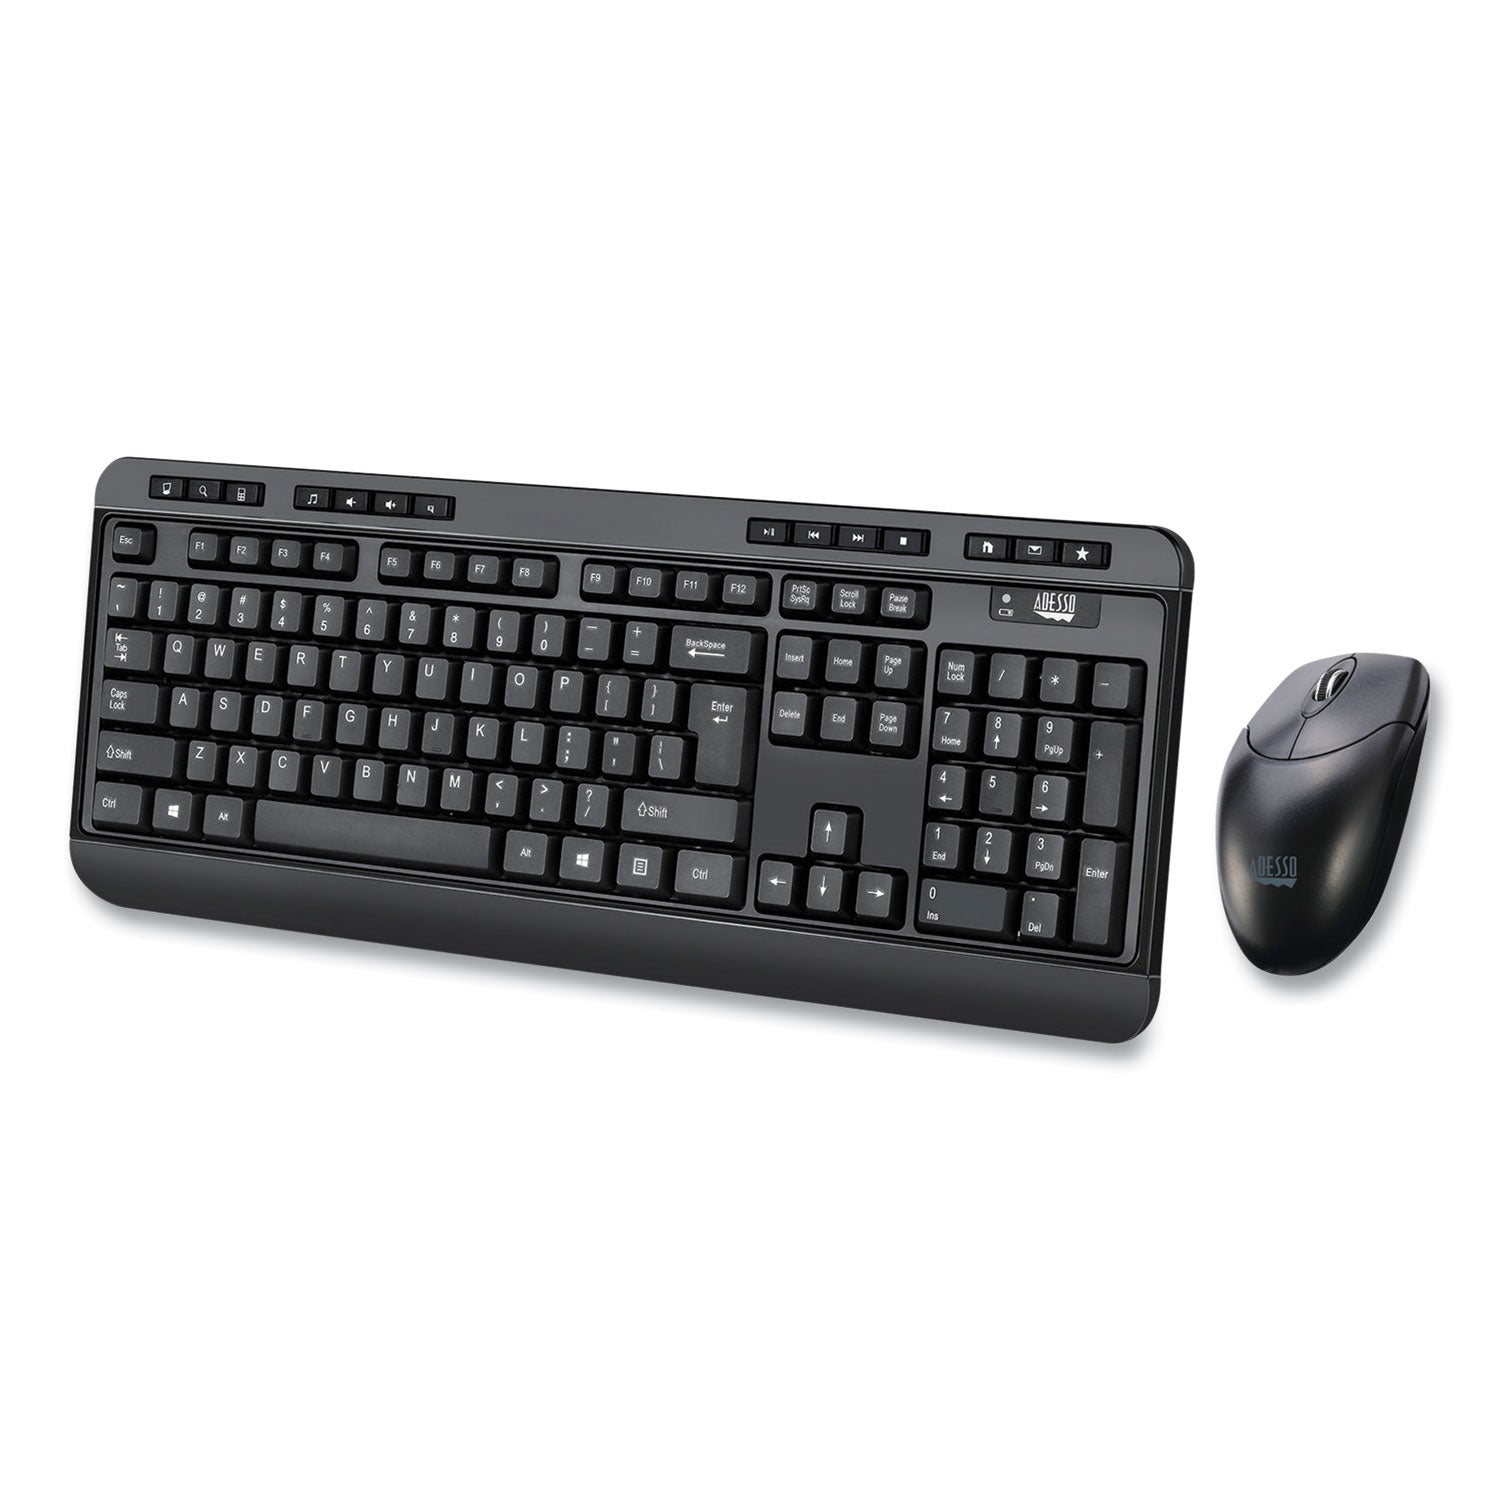 wkb-1320cb-antimicrobial-wireless-desktop-keyboard-and-mouse-24-ghz-frequency-30-ft-wireless-range-black_adewkb1320cb - 2